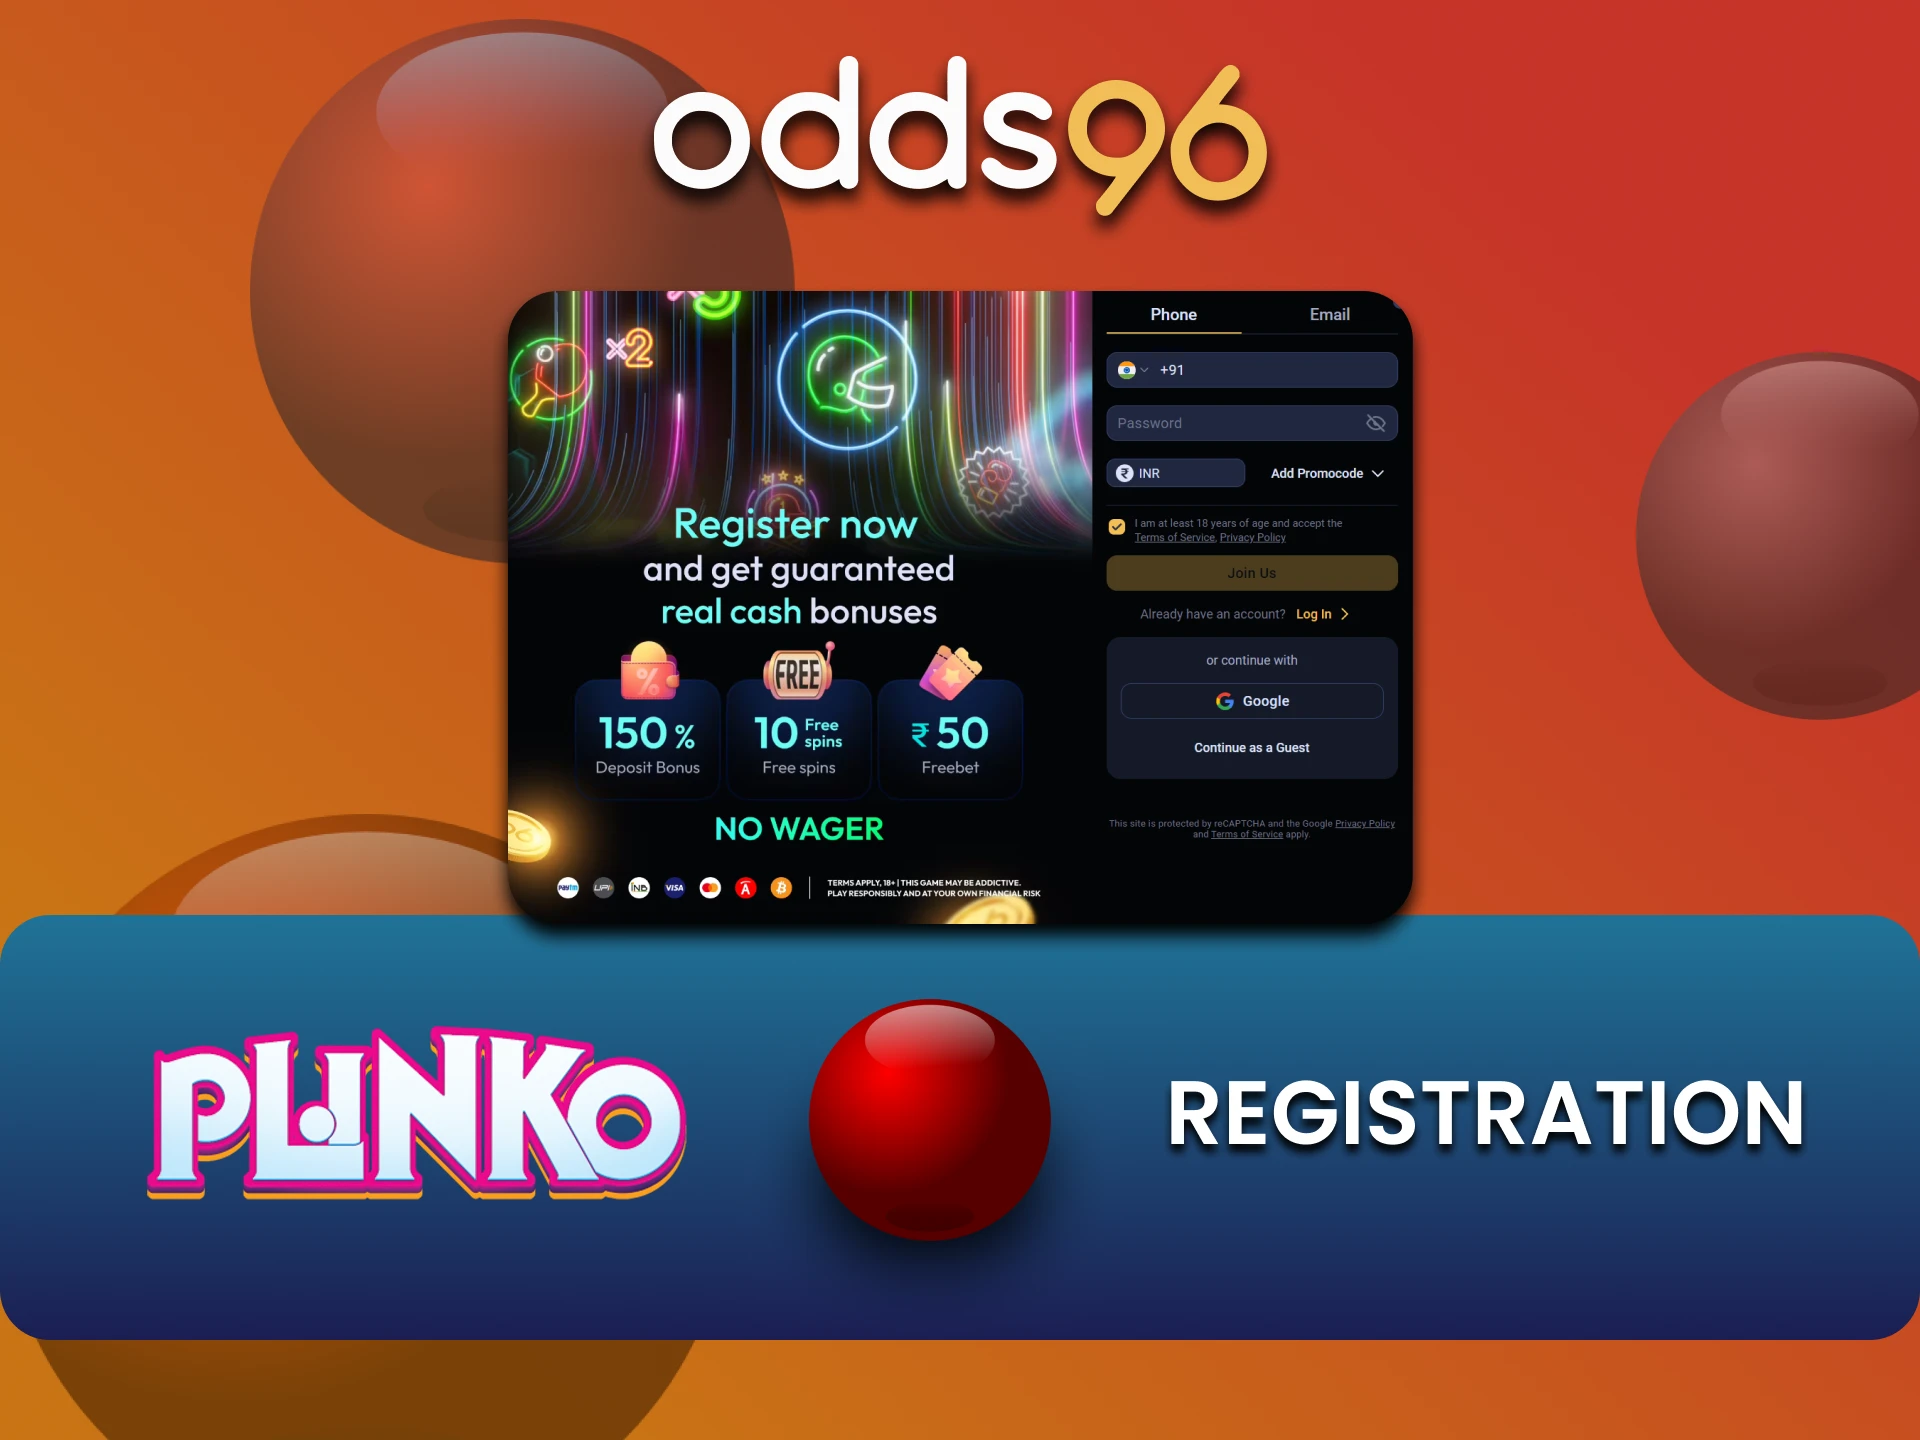 We will tell you how to register on the Odds96 website to play Plinko.